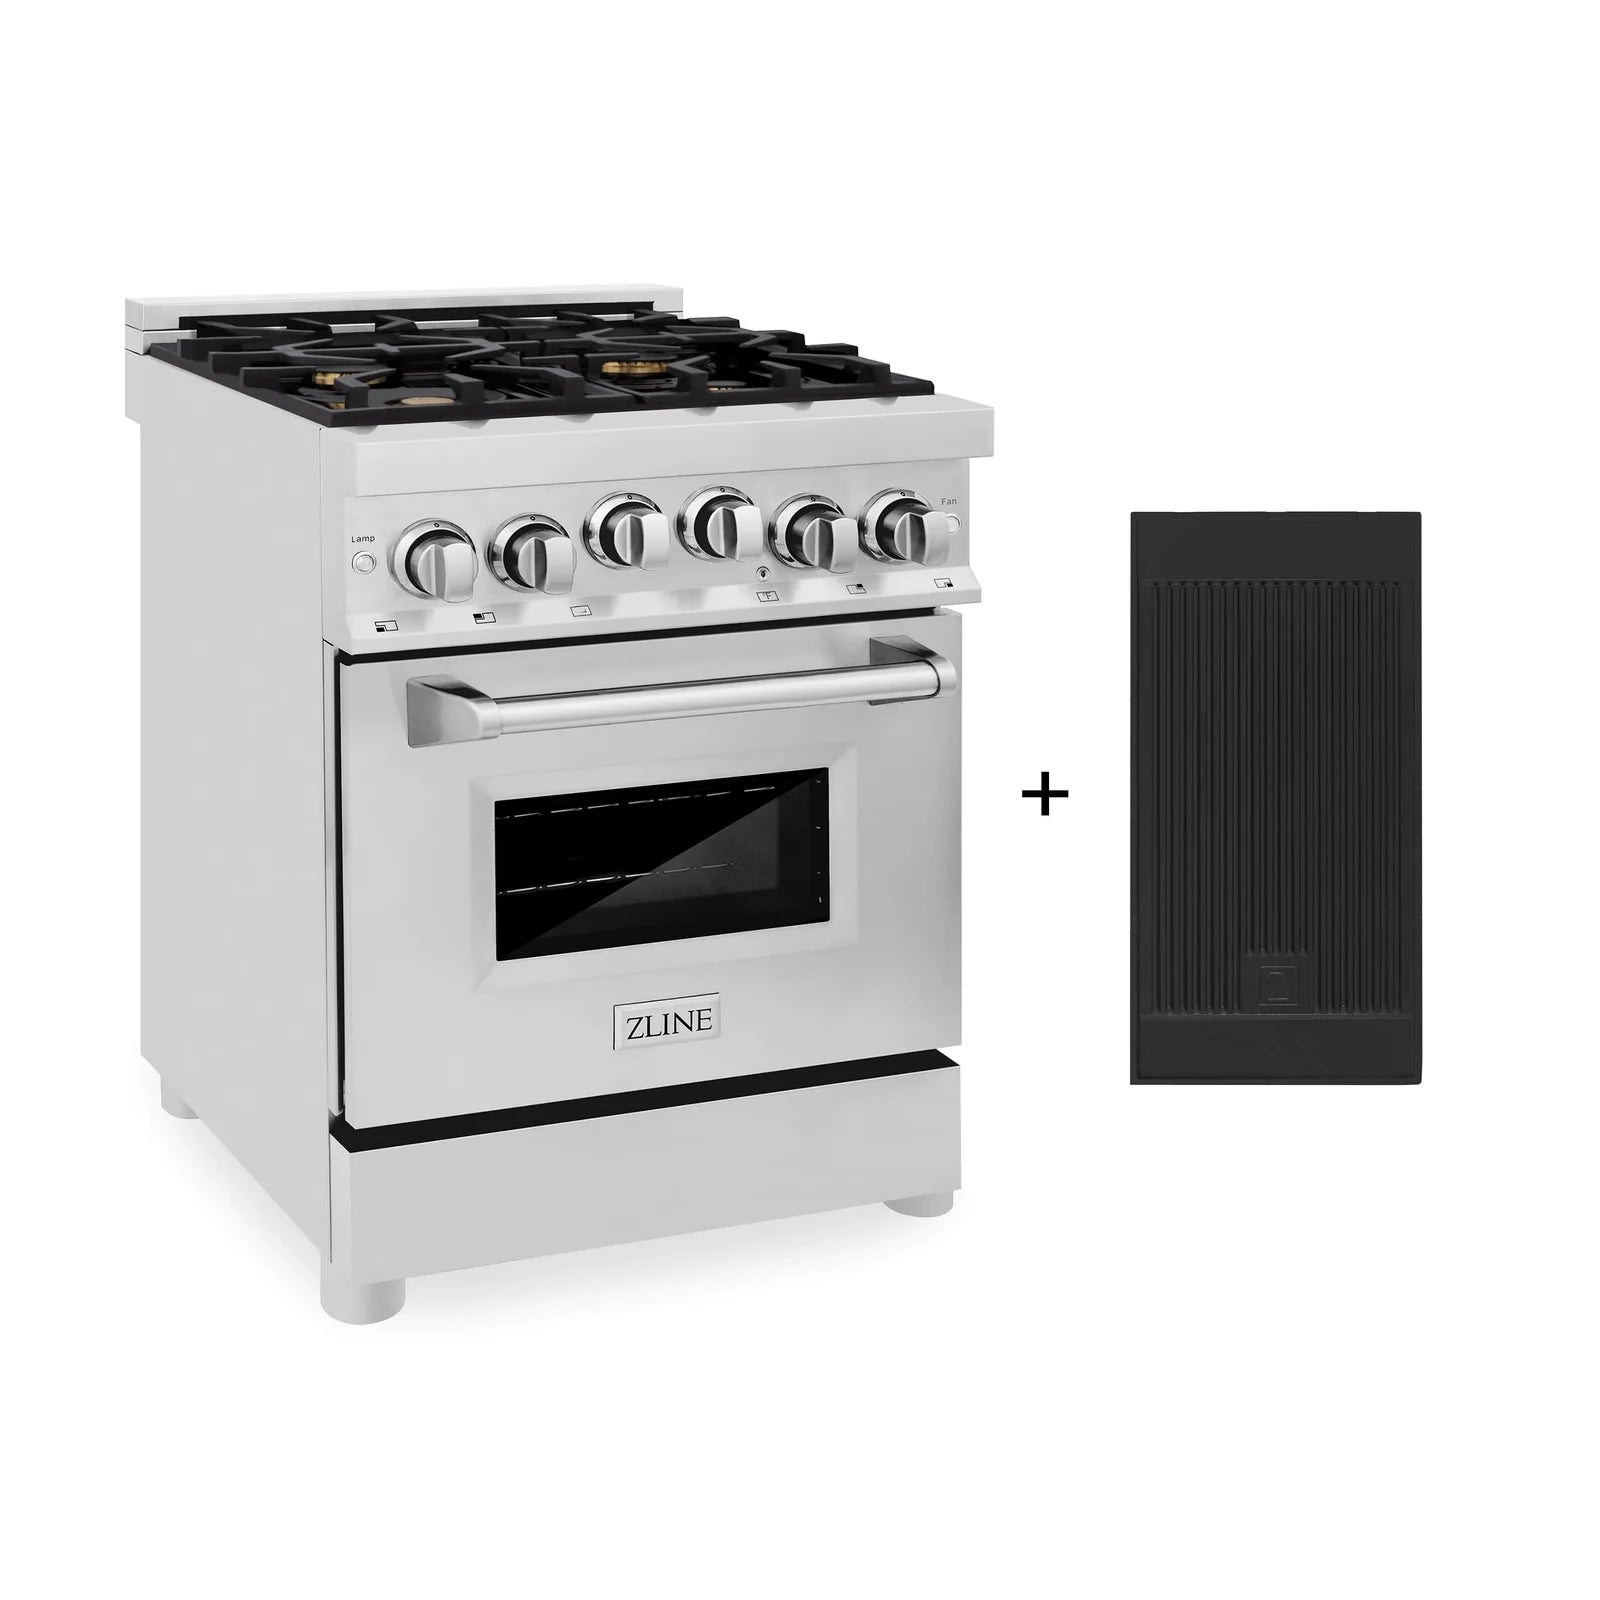 ZLINE 24-Inch Gas Range with 2.8 cu. ft. Gas Oven and Gas Cooktop with Griddle and Brass Burners in Stainless Steel - RG-BR-GR-24